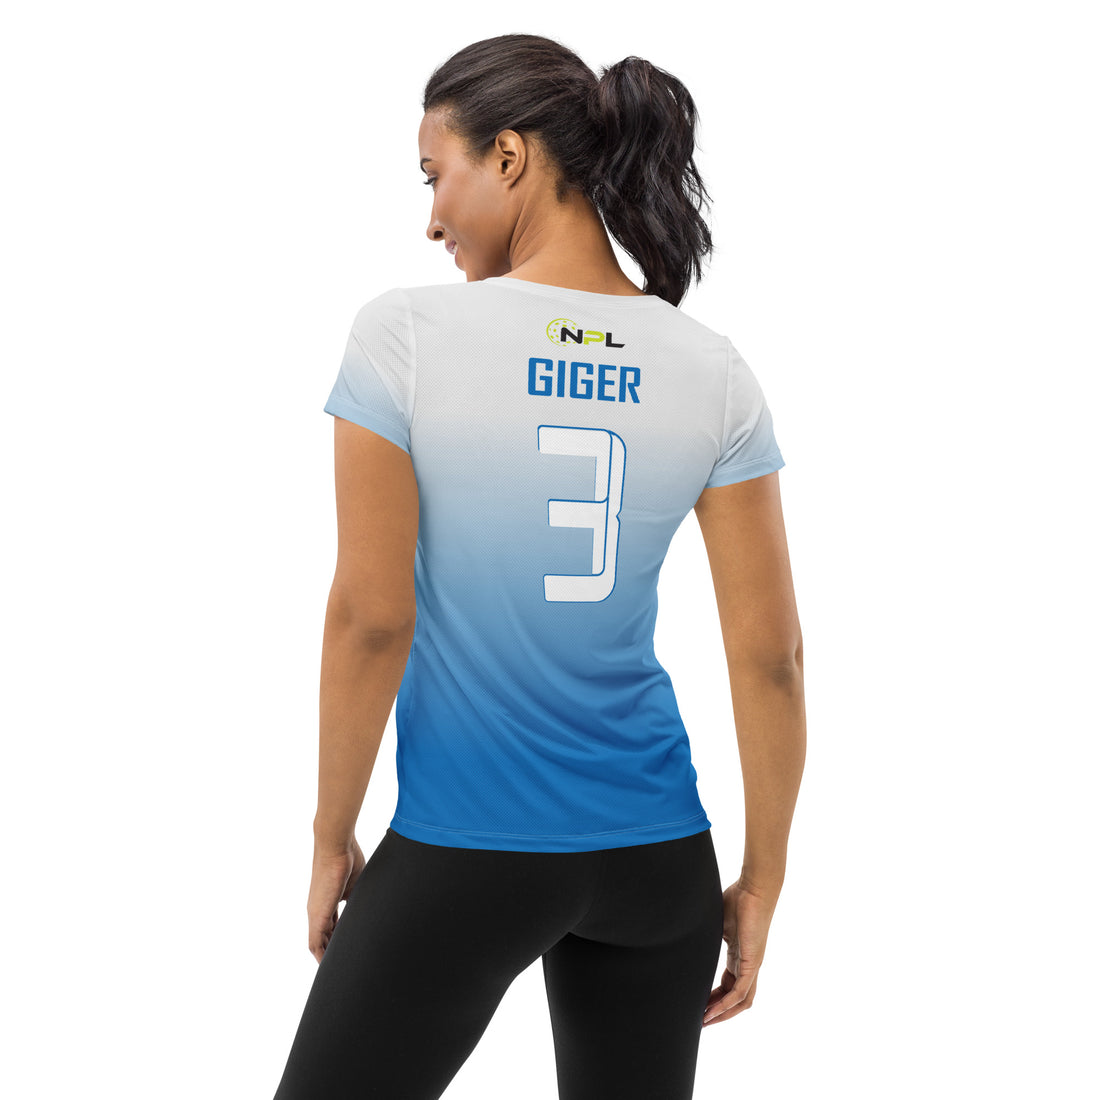 Eileen Giger 3 Boca Raton Picklers™ SKYblue™ 2023 Authentic Women's Short Sleeve Jersey